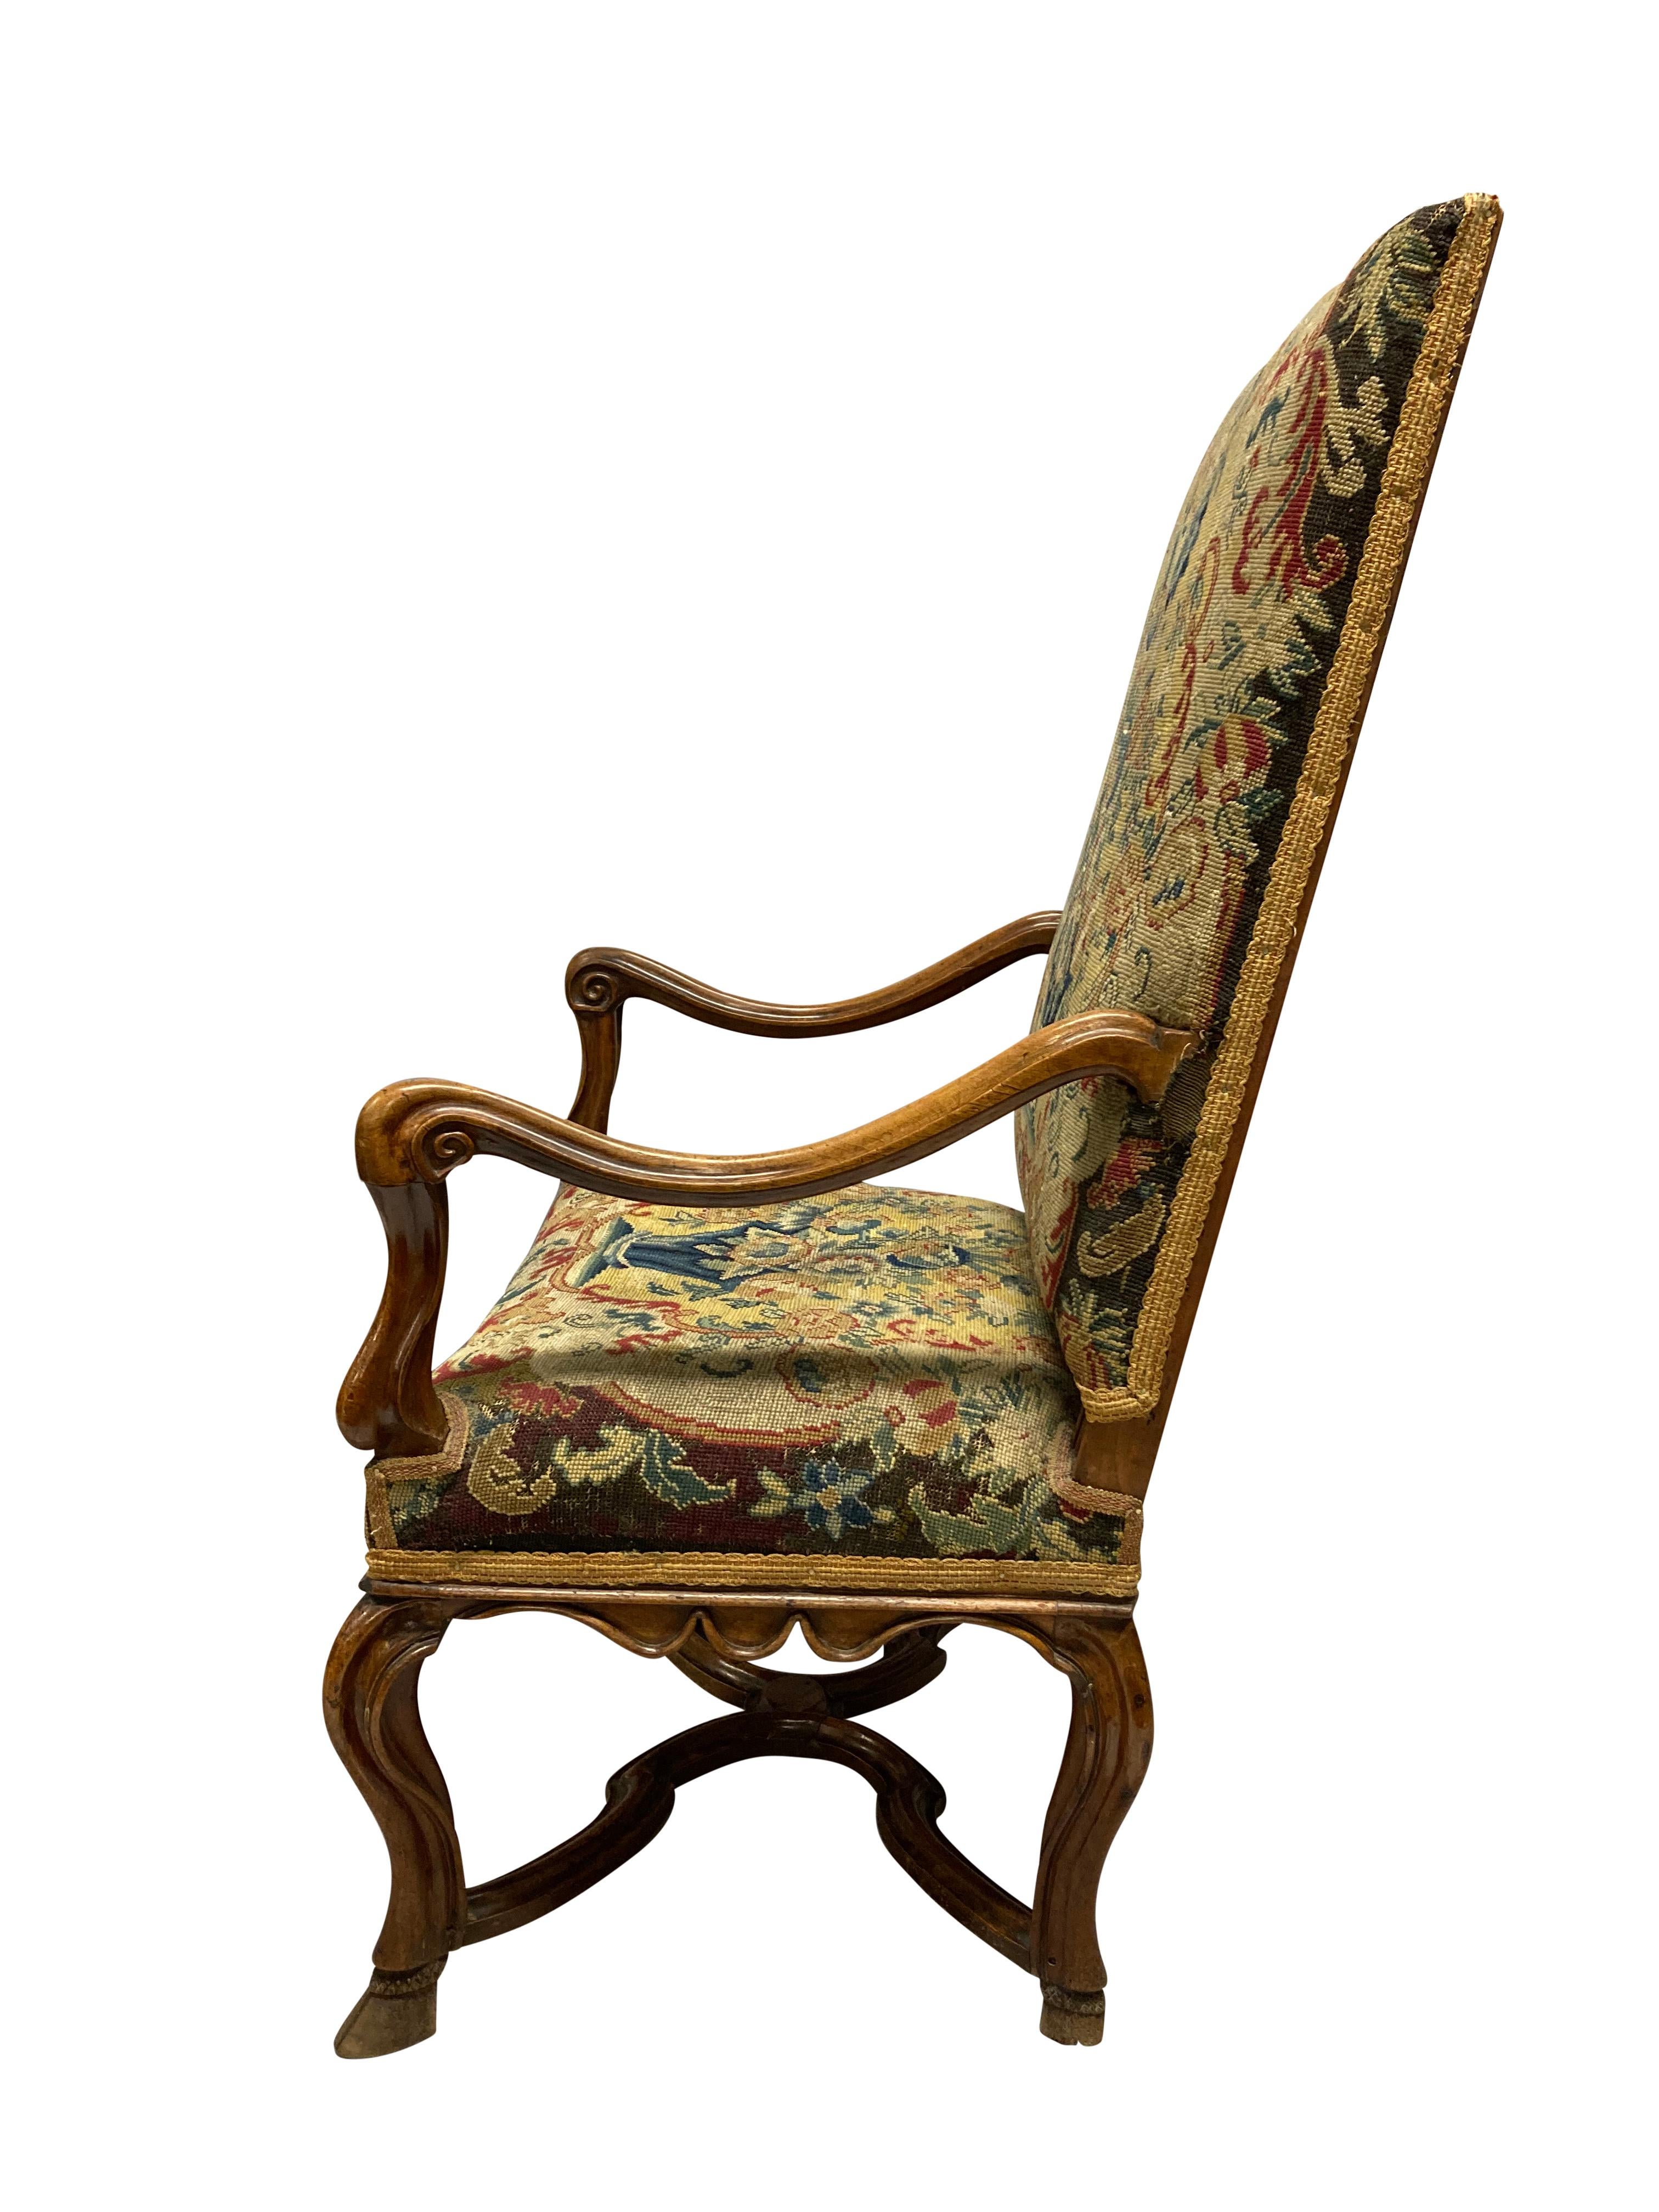 Early 18th Century William & Mary Armchair Covered in a Fine Needlepoint Tapestry